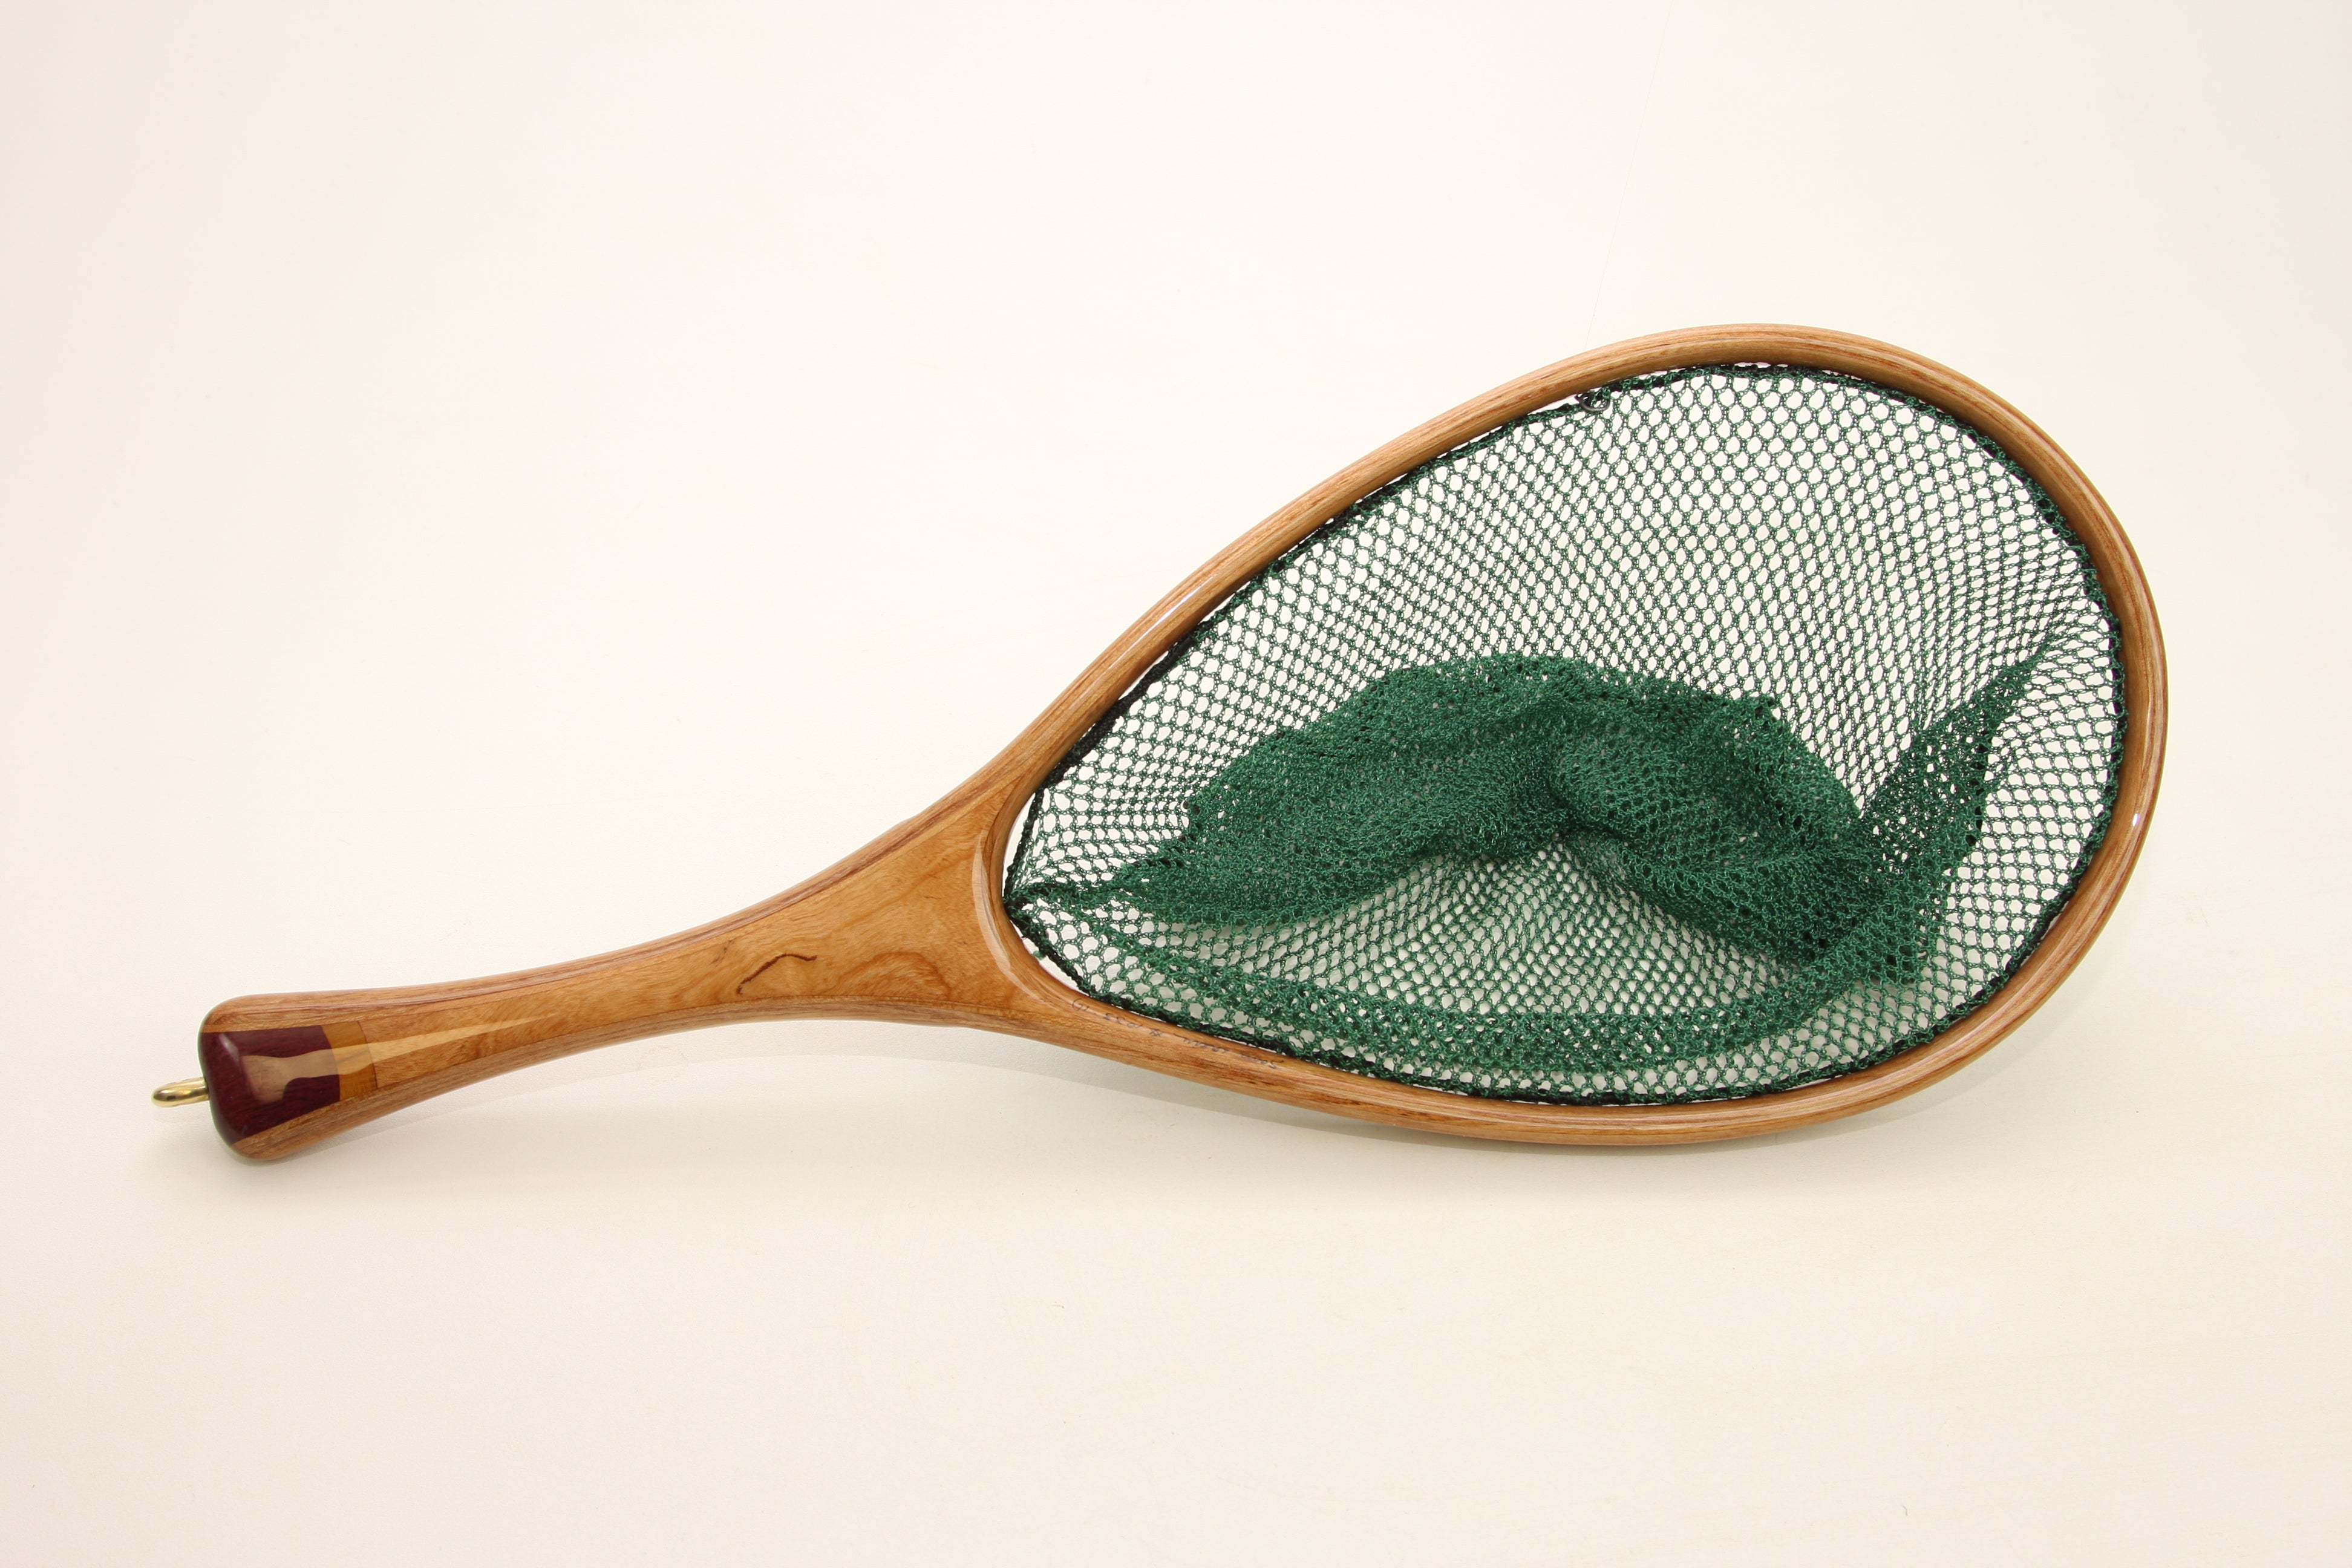 Small Brook Trout Landing Net: Cherry and Red Elm - Nets that Honor the Fish